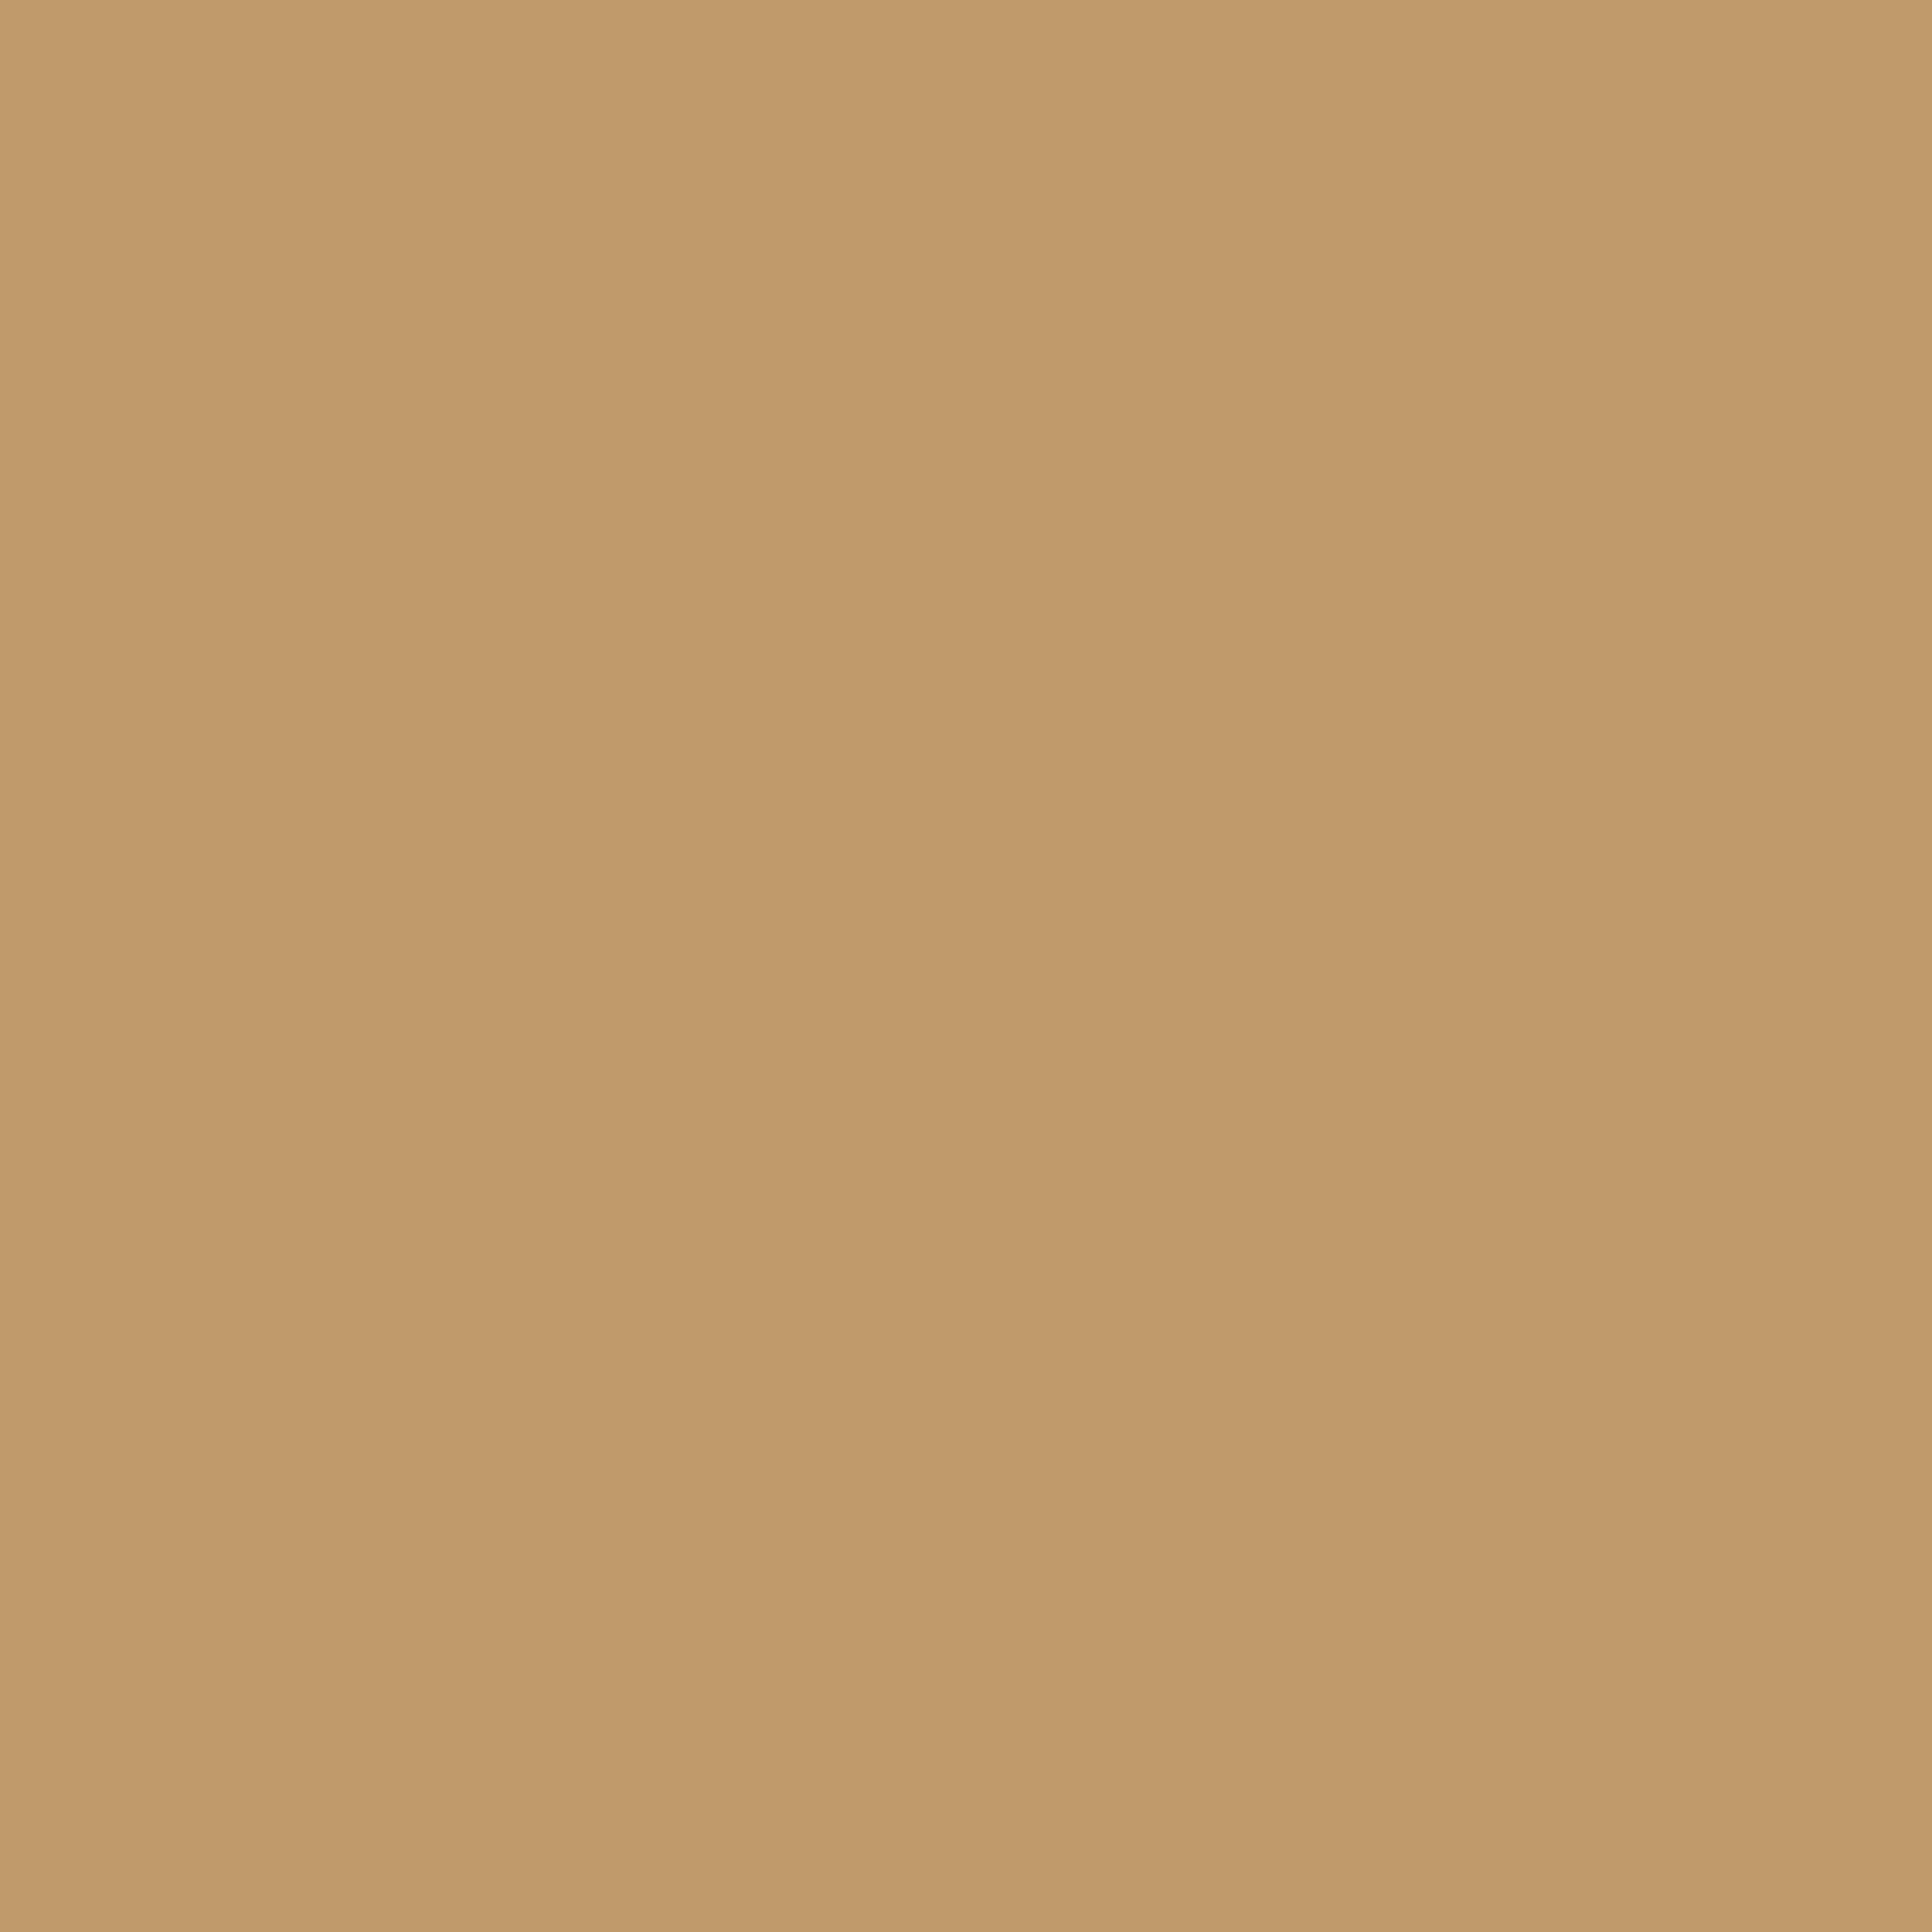 3600x3600 Wood Brown Solid Color Background